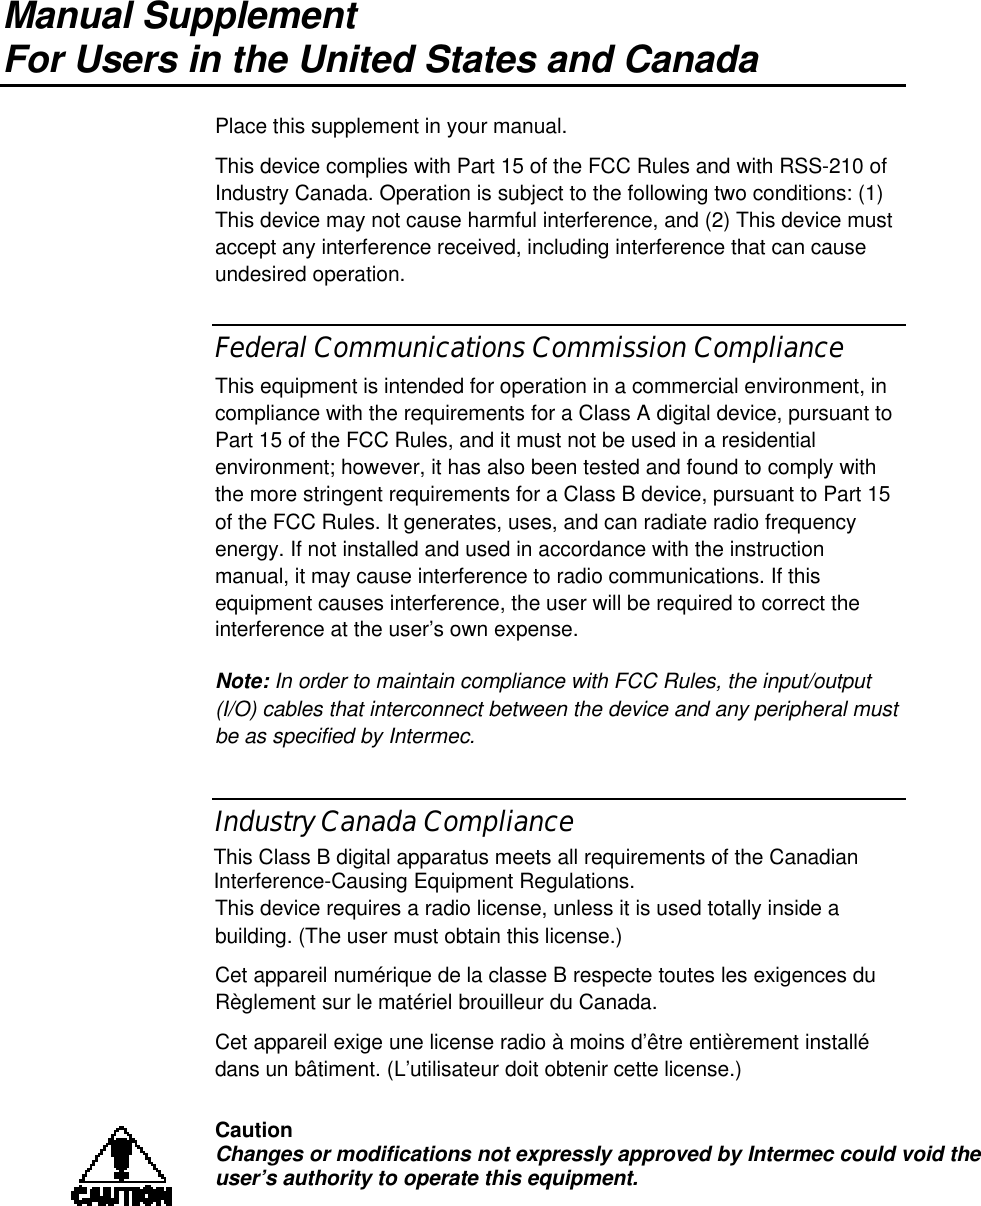 Manual SupplementFor Users in the United States and CanadaPlace this supplement in your manual.This device complies with Part 15 of the FCC Rules and with RSS-210 ofIndustry Canada. Operation is subject to the following two conditions: (1)This device may not cause harmful interference, and (2) This device mustaccept any interference received, including interference that can causeundesired operation.Federal Communications Commission ComplianceThis equipment is intended for operation in a commercial environment, incompliance with the requirements for a Class A digital device, pursuant toPart 15 of the FCC Rules, and it must not be used in a residentialenvironment; however, it has also been tested and found to comply withthe more stringent requirements for a Class B device, pursuant to Part 15of the FCC Rules. It generates, uses, and can radiate radio frequencyenergy. If not installed and used in accordance with the instructionmanual, it may cause interference to radio communications. If thisequipment causes interference, the user will be required to correct theinterference at the user’s own expense.Note: In order to maintain compliance with FCC Rules, the input/output(I/O) cables that interconnect between the device and any peripheral mustbe as specified by Intermec.Industry Canada ComplianceThis Class B digital apparatus meets all requirements of the CanadianInterference-Causing Equipment Regulations.This device requires a radio license, unless it is used totally inside abuilding. (The user must obtain this license.)Cet appareil numérique de la classe B respecte toutes les exigences duRèglement sur le matériel brouilleur du Canada.Cet appareil exige une license radio à moins d’être entièrement installédans un bâtiment. (L’utilisateur doit obtenir cette license.)CautionChanges or modifications not expressly approved by Intermec could void theuser’s authority to operate this equipment.